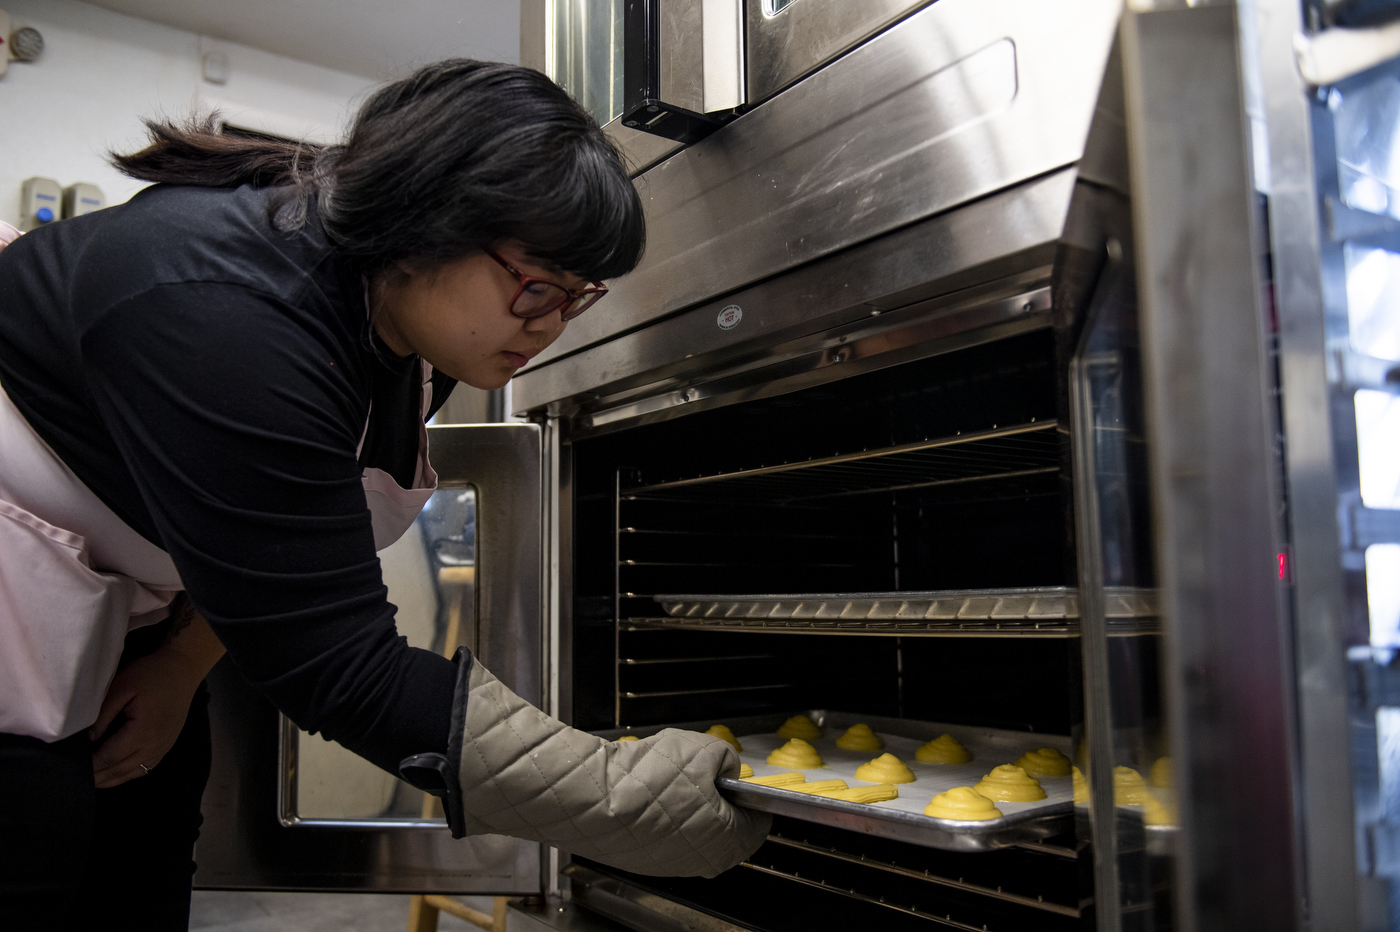 woman putting a tray of yellow sweets into an oven